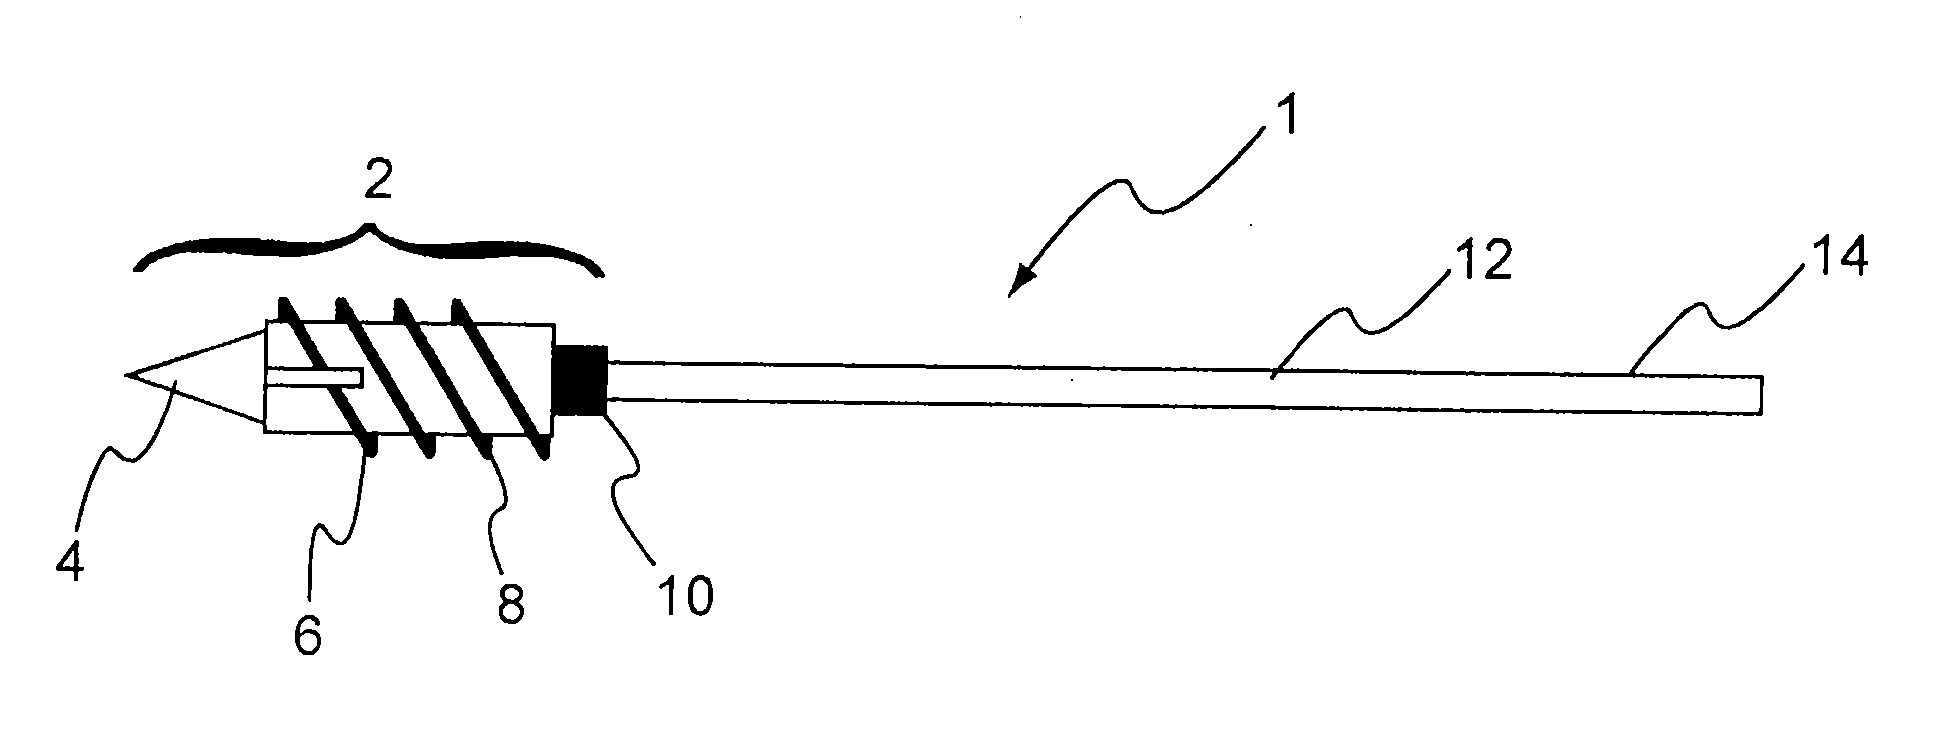 Cannulated bone screw system and method